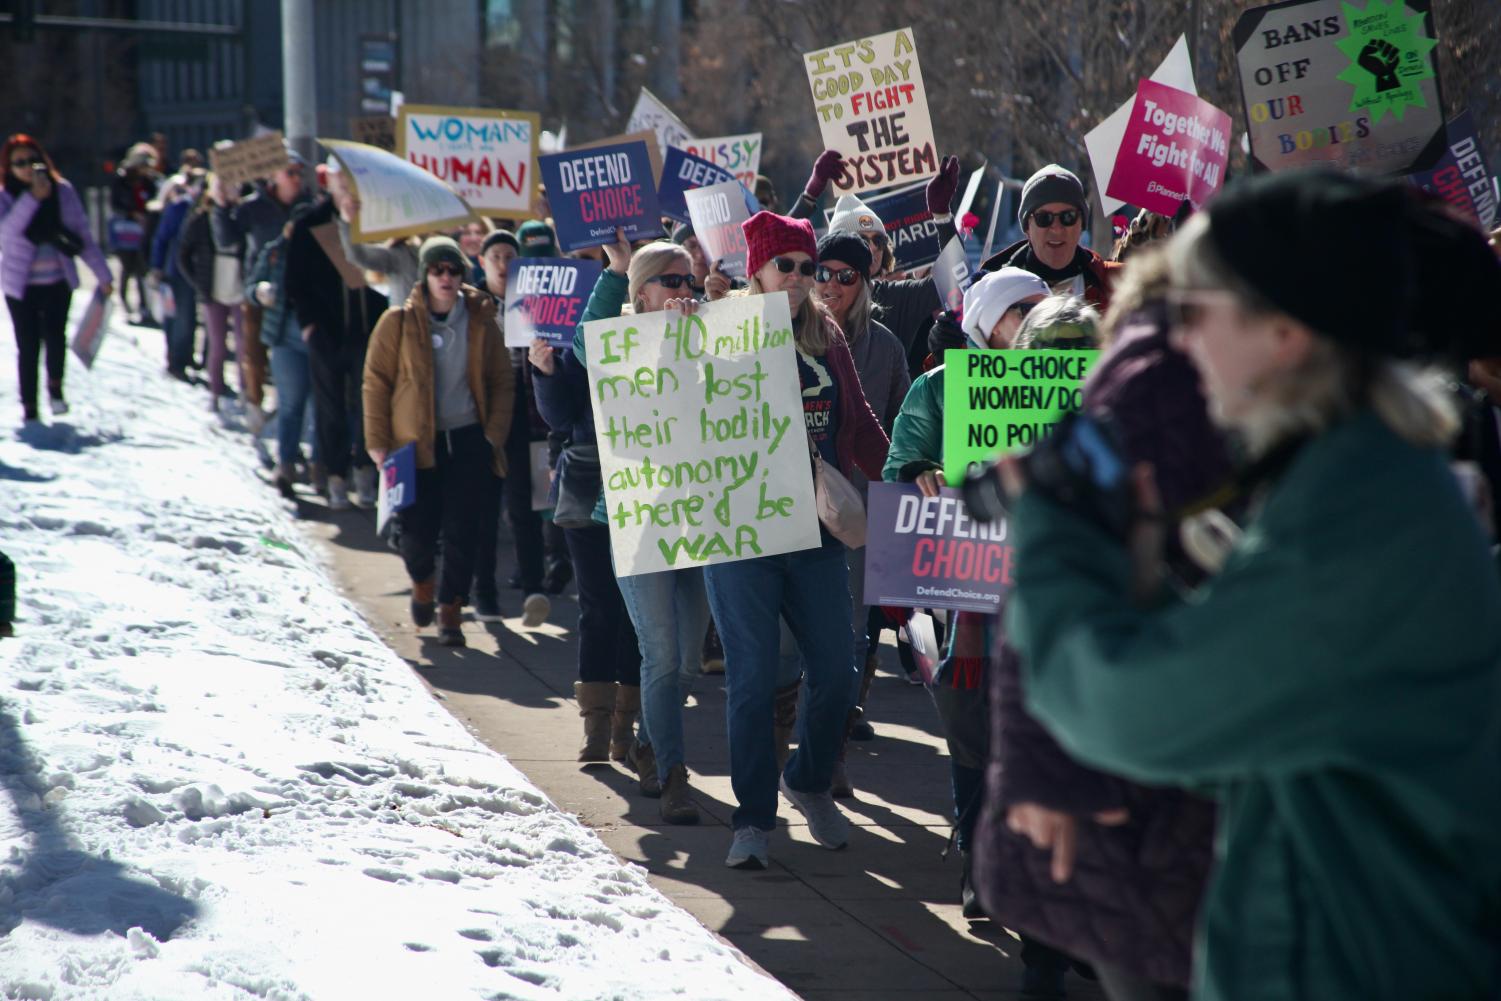 On+50th+Anniversary+of+Roe%2C+Denverites+March+for+Abortion+Justice%2C+Womens+Rights%3A+See+Moments+Here